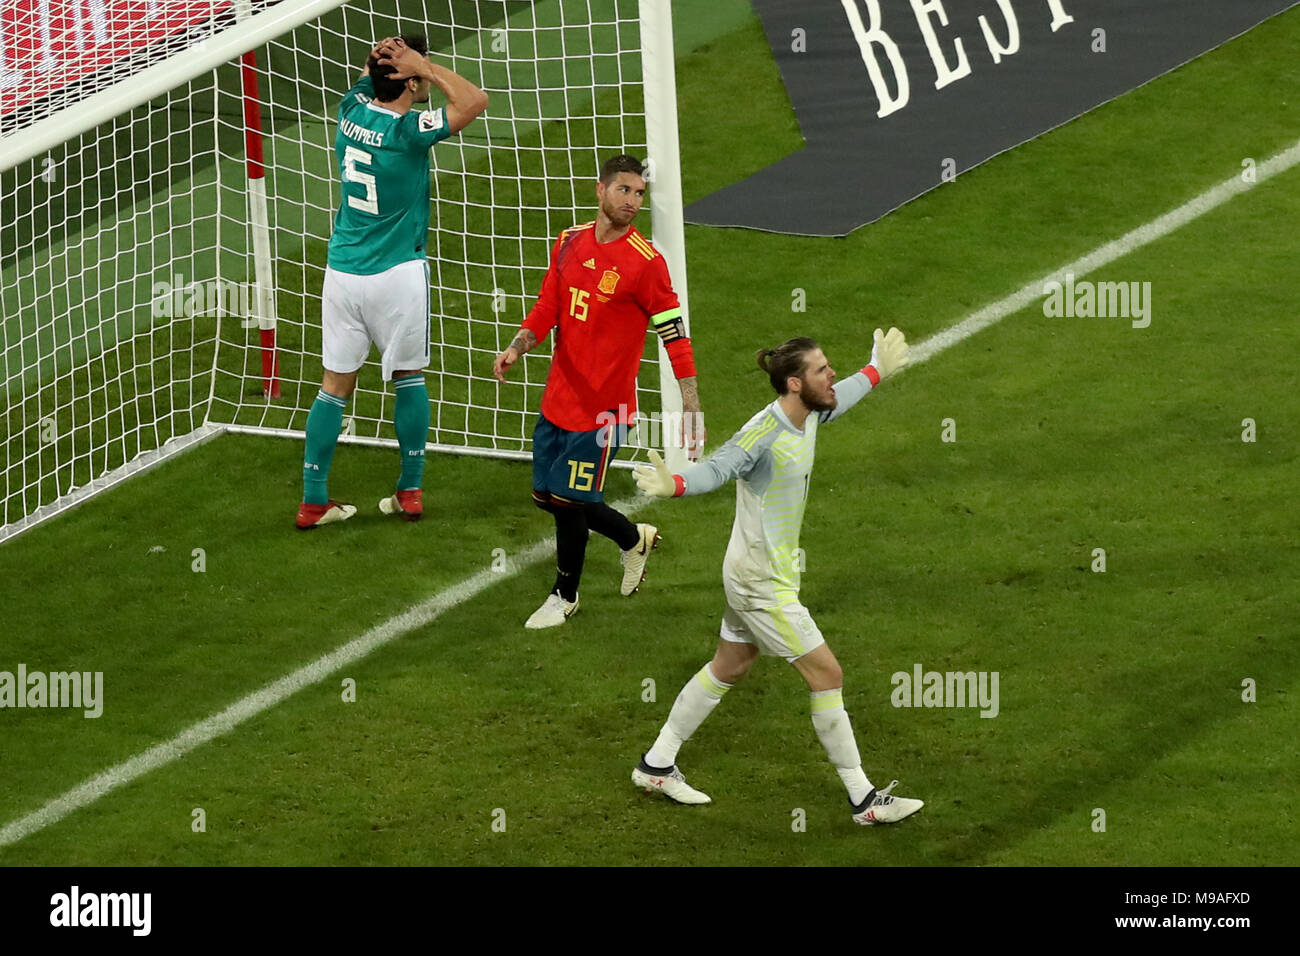 Soccer: Friendly match, Germany vs Spain, 23 March 2018 in the ESPRIT  arena, Duesseldorf, Germany: Spain goalkeeper David De Gea (R) yelling at  his defence, while Germany's Mats Hummels (L) laments himself